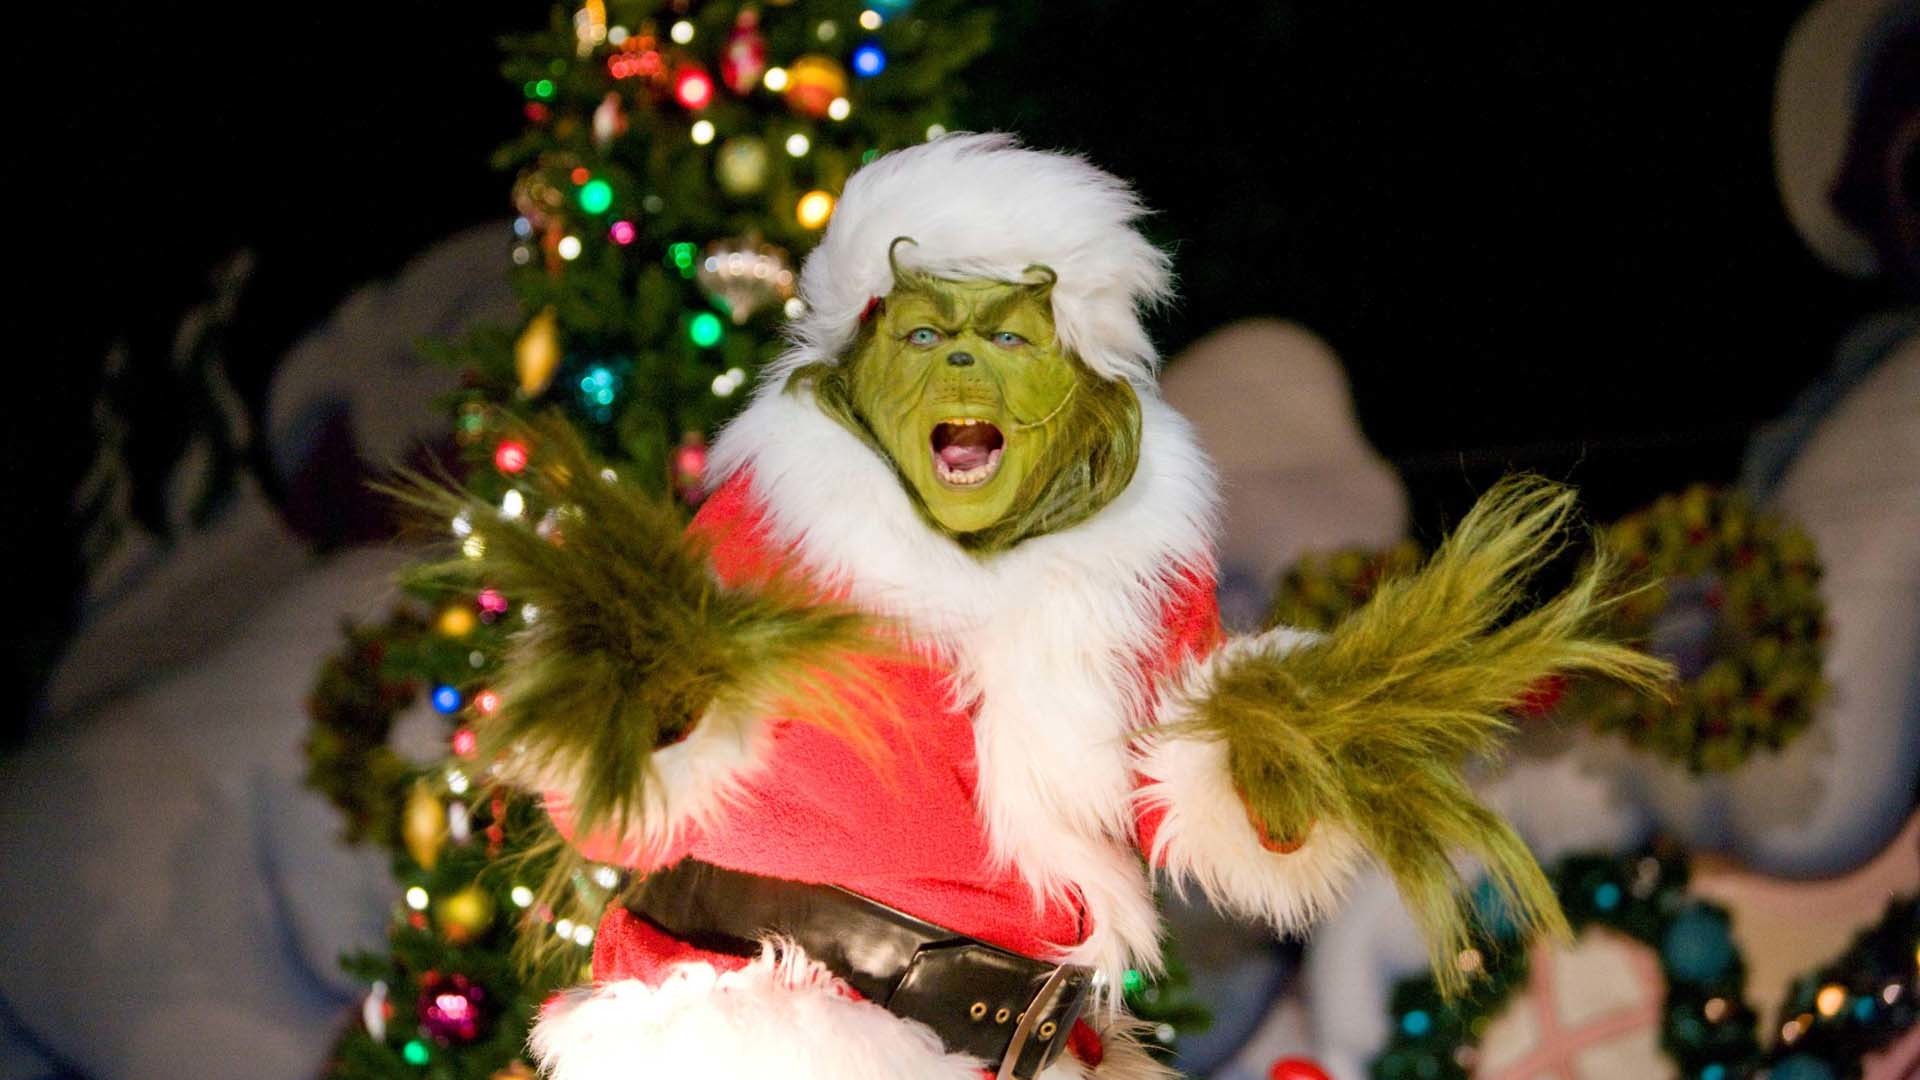 HD the grinch christmas wallpapers  Peakpx